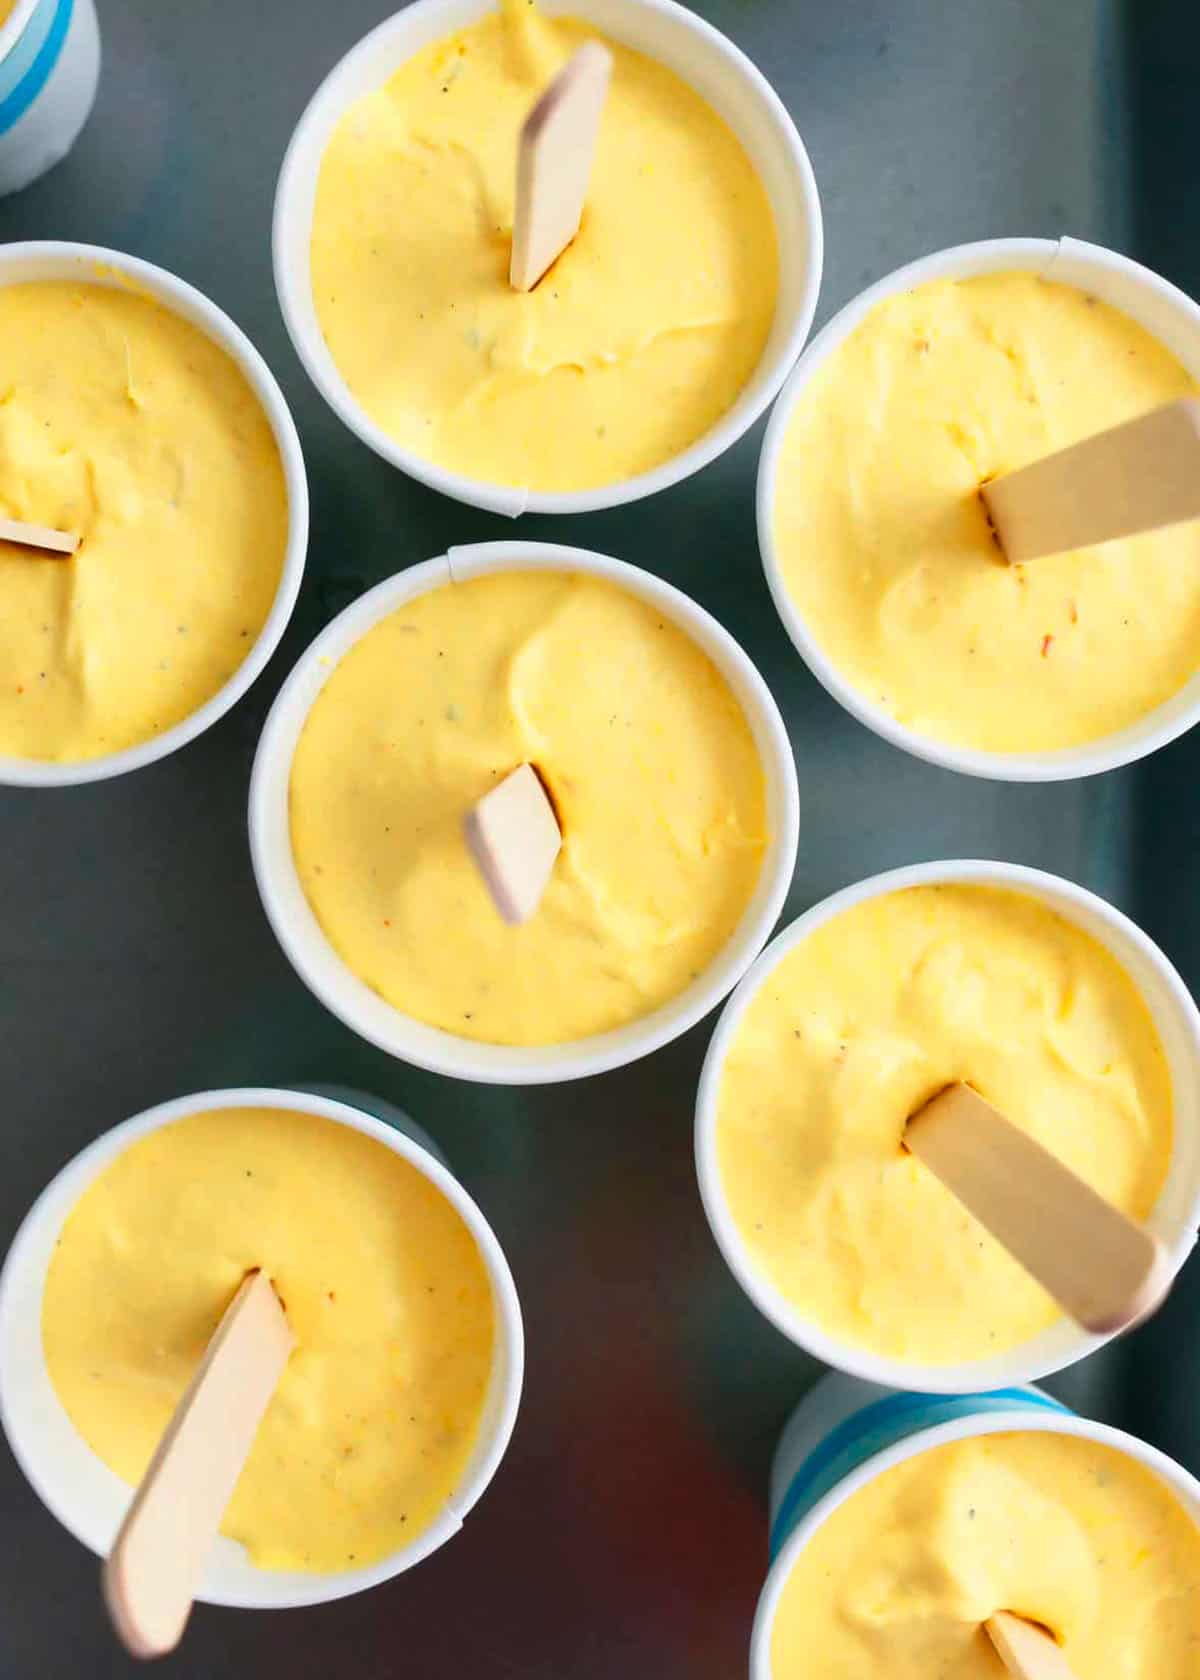 9 mango popsicles in a black tray.